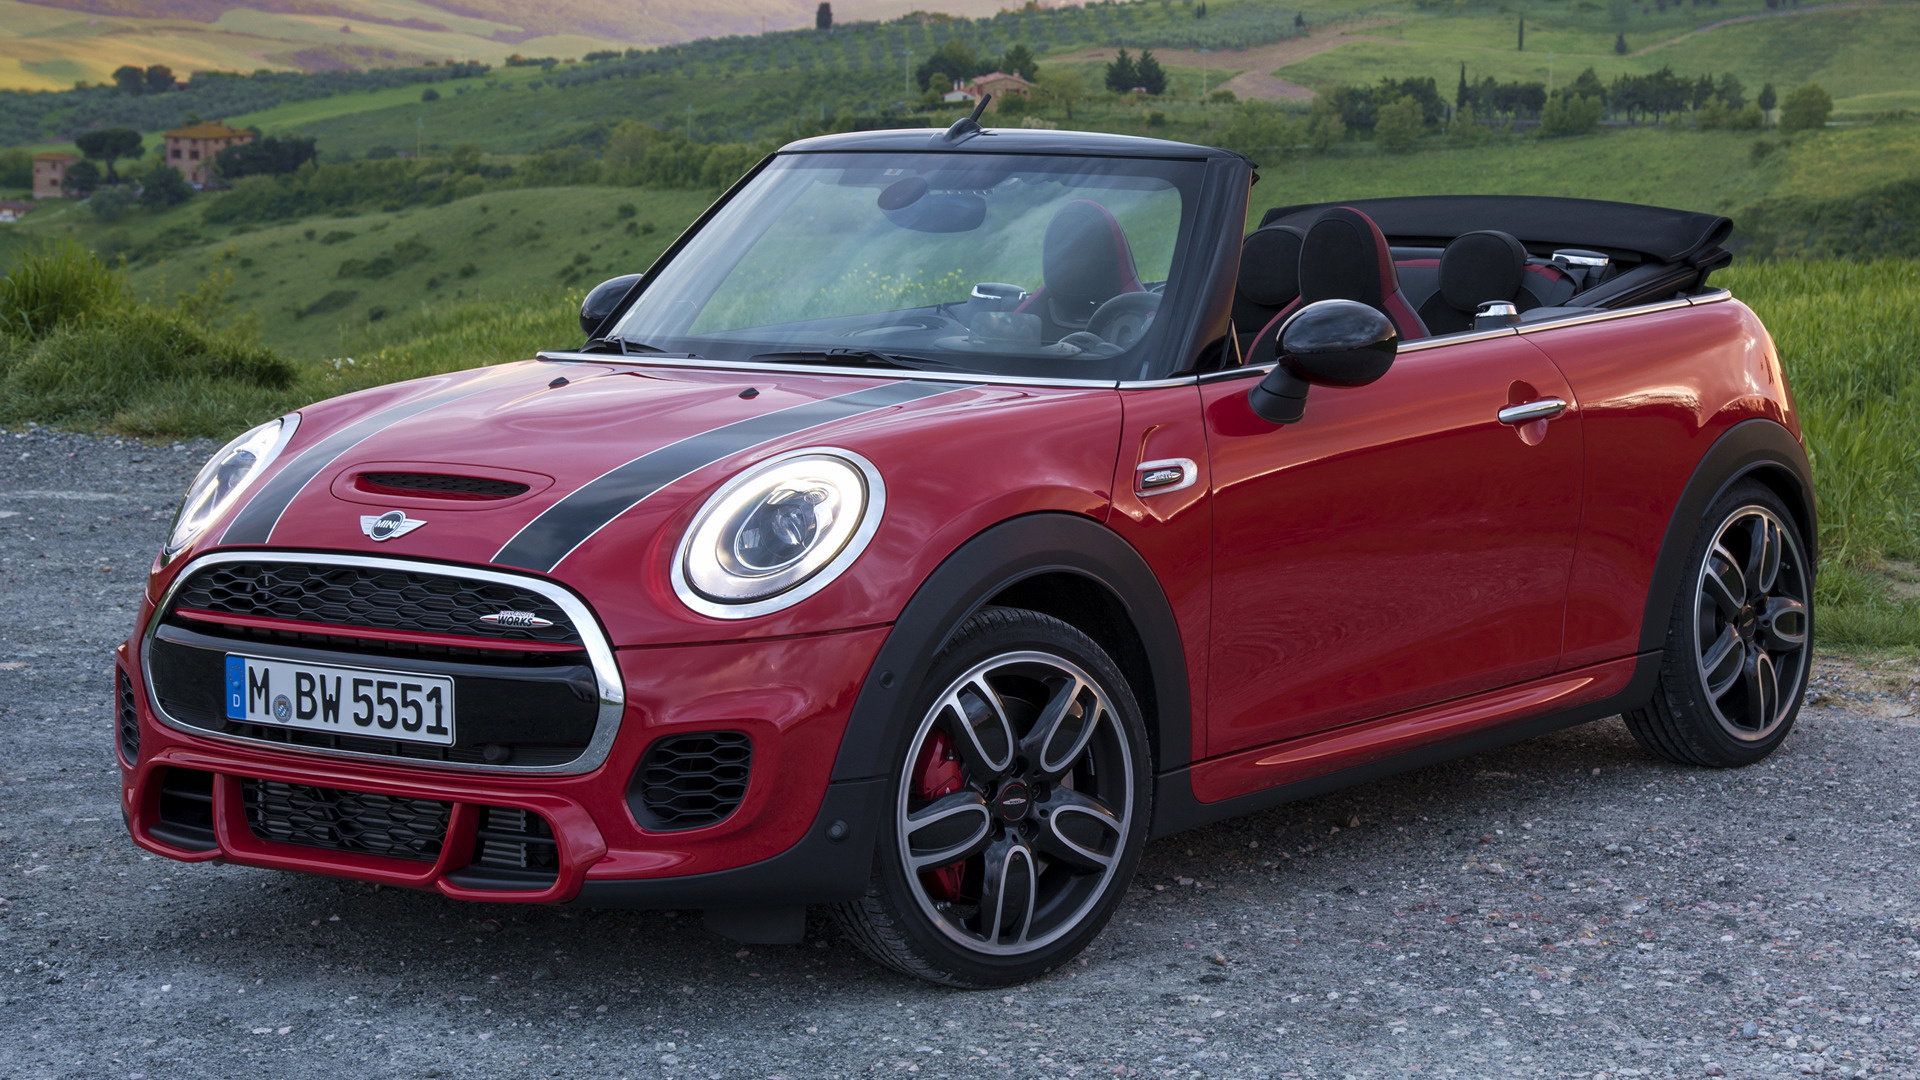 2016 Mini John Cooper Works Cabrio - Wallpapers and HD Images | Car Pixel